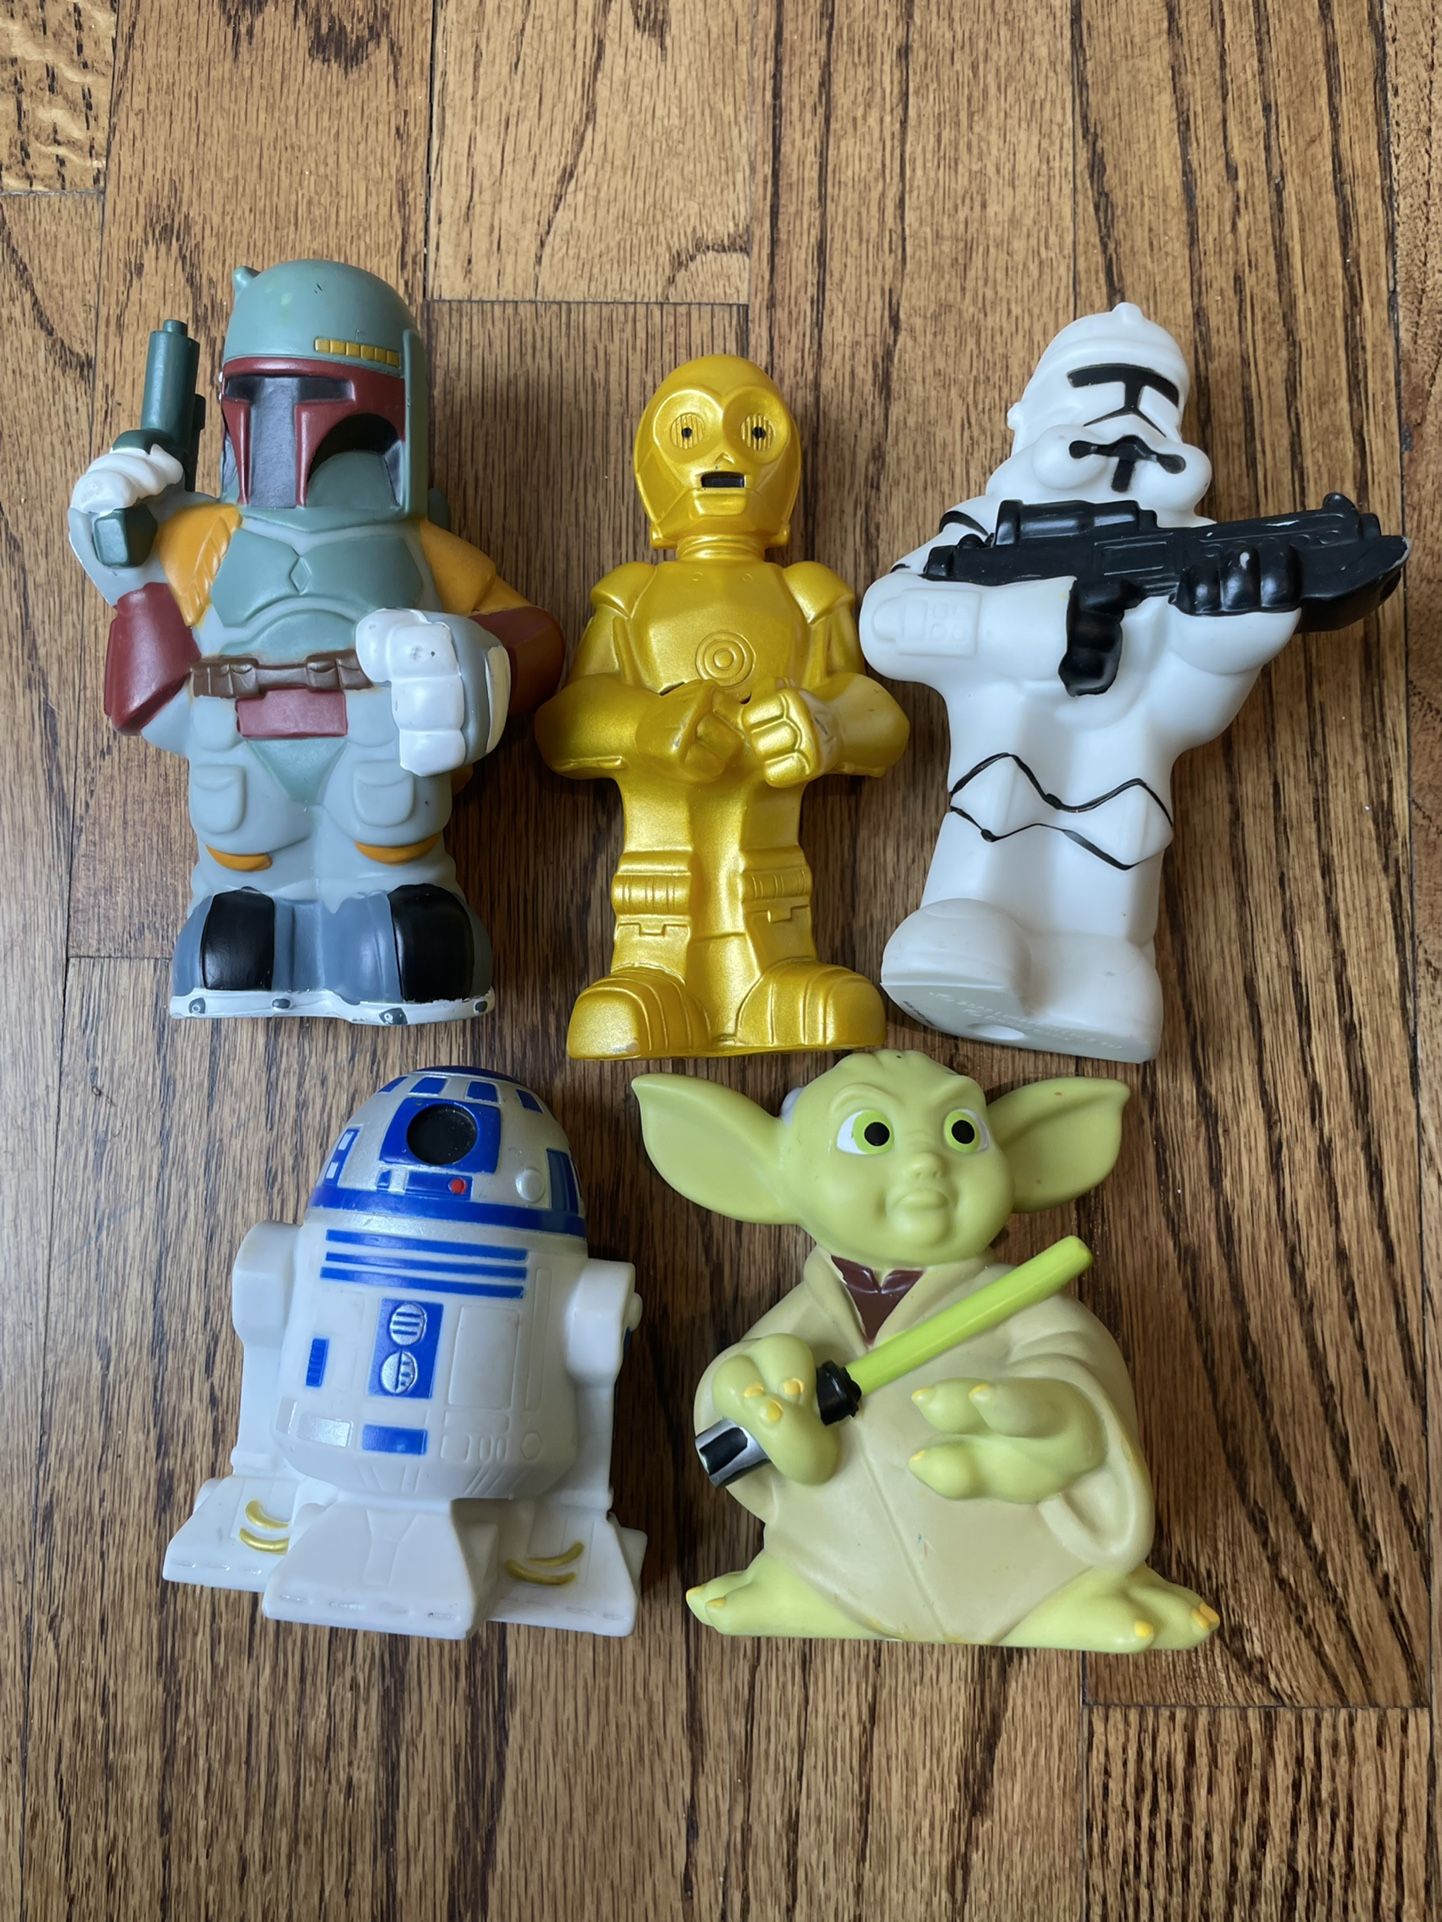 Star Wars Disney Bath Toys Lot of 5 C-3PO  R2 D2, Yoga, Boba, Stormtrooper- 2008. Condition is pre owned and perhaps shows light signs of wear from pl